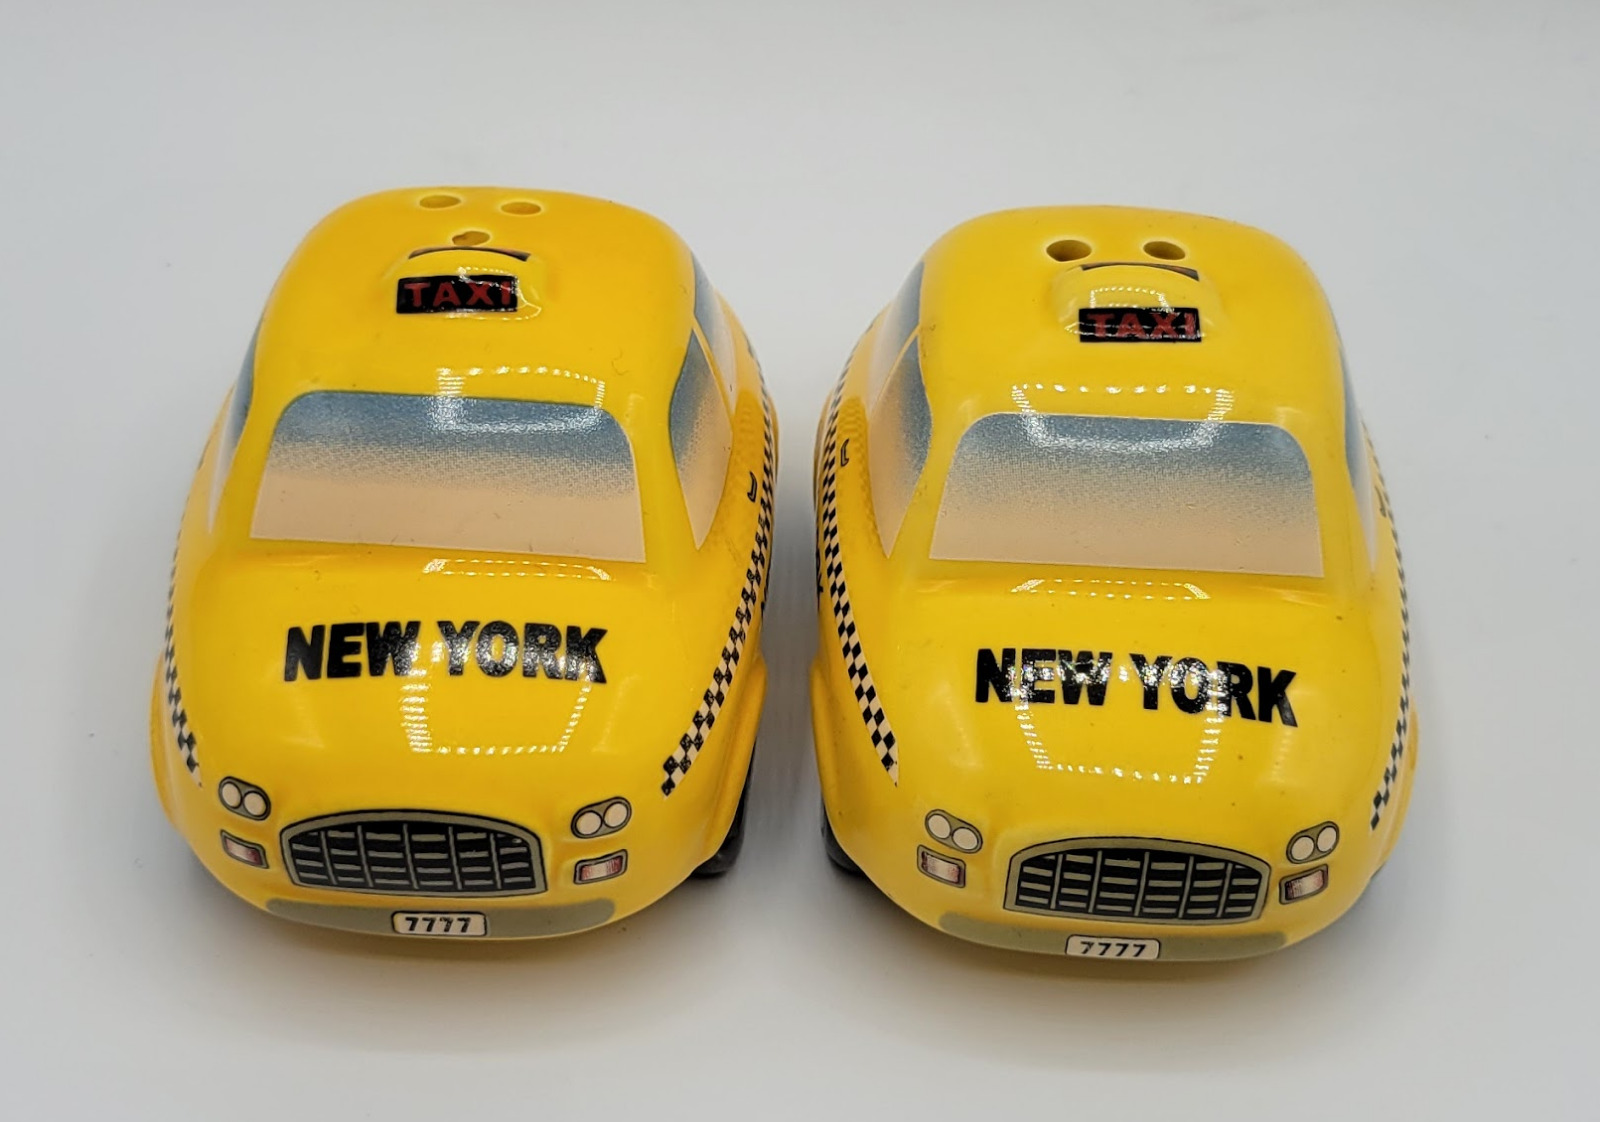 NEW YORK CITY YELLOW TAXI CAB SALT AND PEPPER SHAKERS COLLECTIBLE